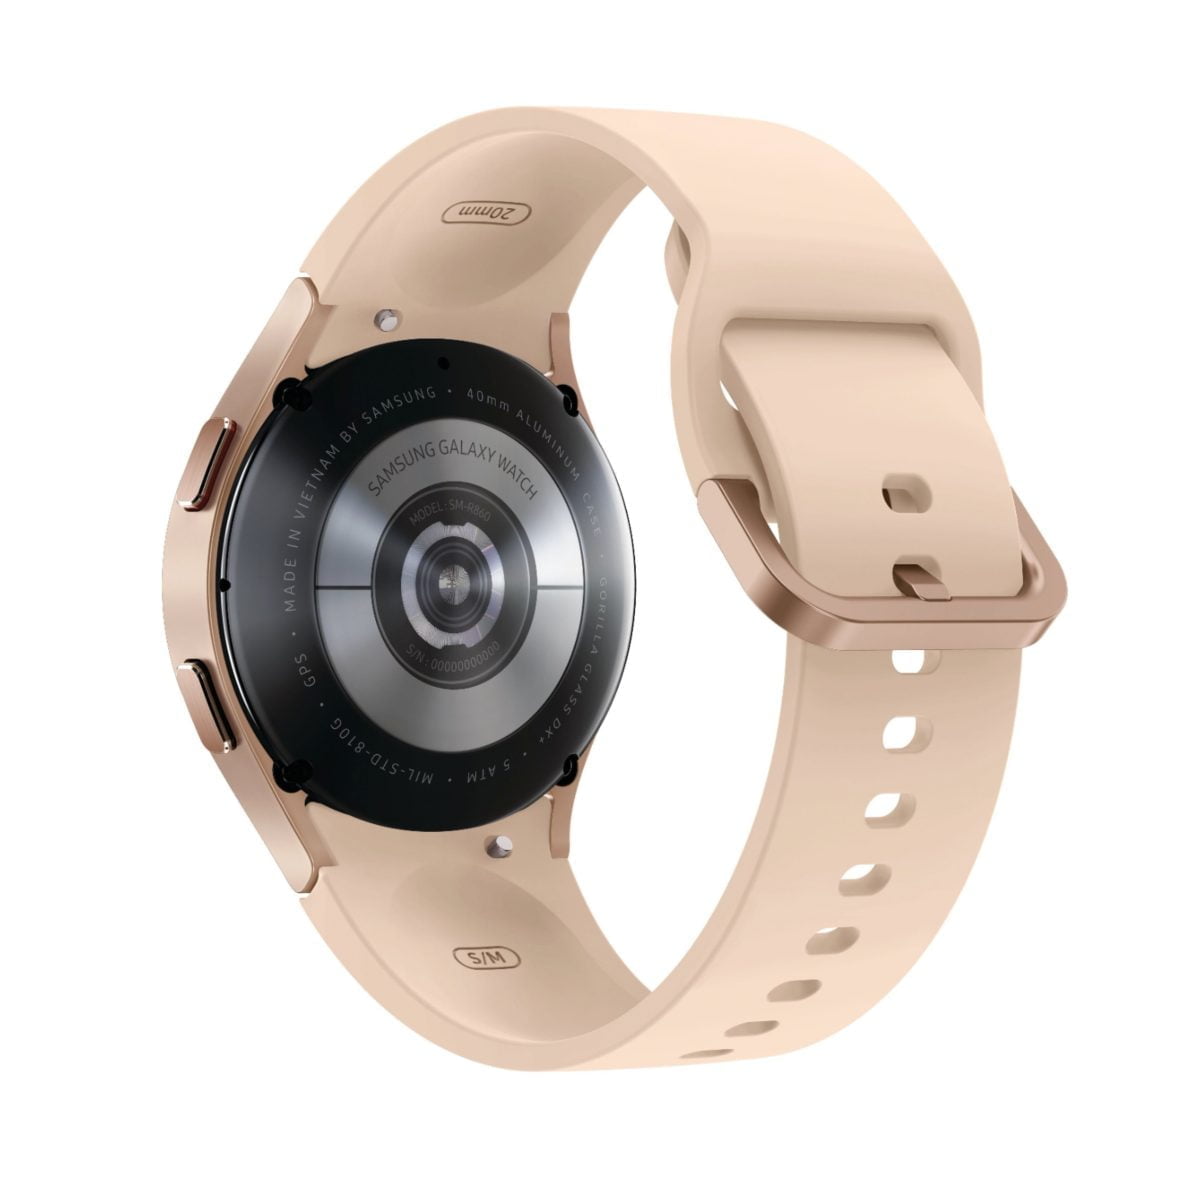 6464604Cv13D Scaled Samsung &Lt;H1&Gt;Samsung Galaxy Watch4 Aluminum Smartwatch 40Mm Bt, Gps - Gold &Lt;Span Class=&Quot;Product-Data-Label Body-Copy&Quot;&Gt;&Lt;Strong&Gt;Model&Lt;/Strong&Gt;: Sm-R860Nzdaxaa&Lt;/Span&Gt;&Lt;/H1&Gt; Https://Www.youtube.com/Watch?V=Plte1N8Pl90 &Lt;Div Class=&Quot;Embedded-Component-Container Lv Product-Description&Quot;&Gt; &Lt;Div Id=&Quot;Shop-Product-Description-6031181&Quot; Class=&Quot;None&Quot; Data-Version=&Quot;1.3.38&Quot;&Gt; &Lt;Div Class=&Quot;Shop-Product-Description&Quot;&Gt;&Lt;Section Class=&Quot;Align-Heading-Left&Quot; Data-Reactroot=&Quot;&Quot;&Gt; &Lt;Div Class=&Quot;Long-Description-Container Body-Copy &Quot;&Gt; &Lt;Div Class=&Quot;Html-Fragment&Quot;&Gt; &Lt;Div&Gt; &Lt;Div&Gt;Crush Workouts And All Your Health Goals With Samsung Galaxy Watch4. Be Your Best With The Watch That Knows You Best.&Lt;/Div&Gt; &Lt;Div&Gt;We All Want To Know More About Ourselves, So We Can Be The Best Version Of Ourselves. That'S Why We Engineered The All-New Galaxy Watch4 Classic To Be The Stylish Companion To Your Journey Towards A Healthier You Some Looks Are Timeless, Like The Galaxy Watch4 Classic’s Rotating Bezel And Vivid Screen. The Refined Design Adds Sophistication To Your Wrist For An Elevated Style. Its High-End Stainless Steel Materials Shows Off Its Powerful And Intuitive Functionality&Lt;/Div&Gt; &Lt;/Div&Gt; &Lt;/Div&Gt; &Lt;/Div&Gt; &Lt;/Section&Gt;&Lt;/Div&Gt; &Lt;/Div&Gt; &Lt;/Div&Gt; Samsung Galaxy Watch4 Samsung Galaxy Watch4 Aluminum Smartwatch 40Mm- Gold